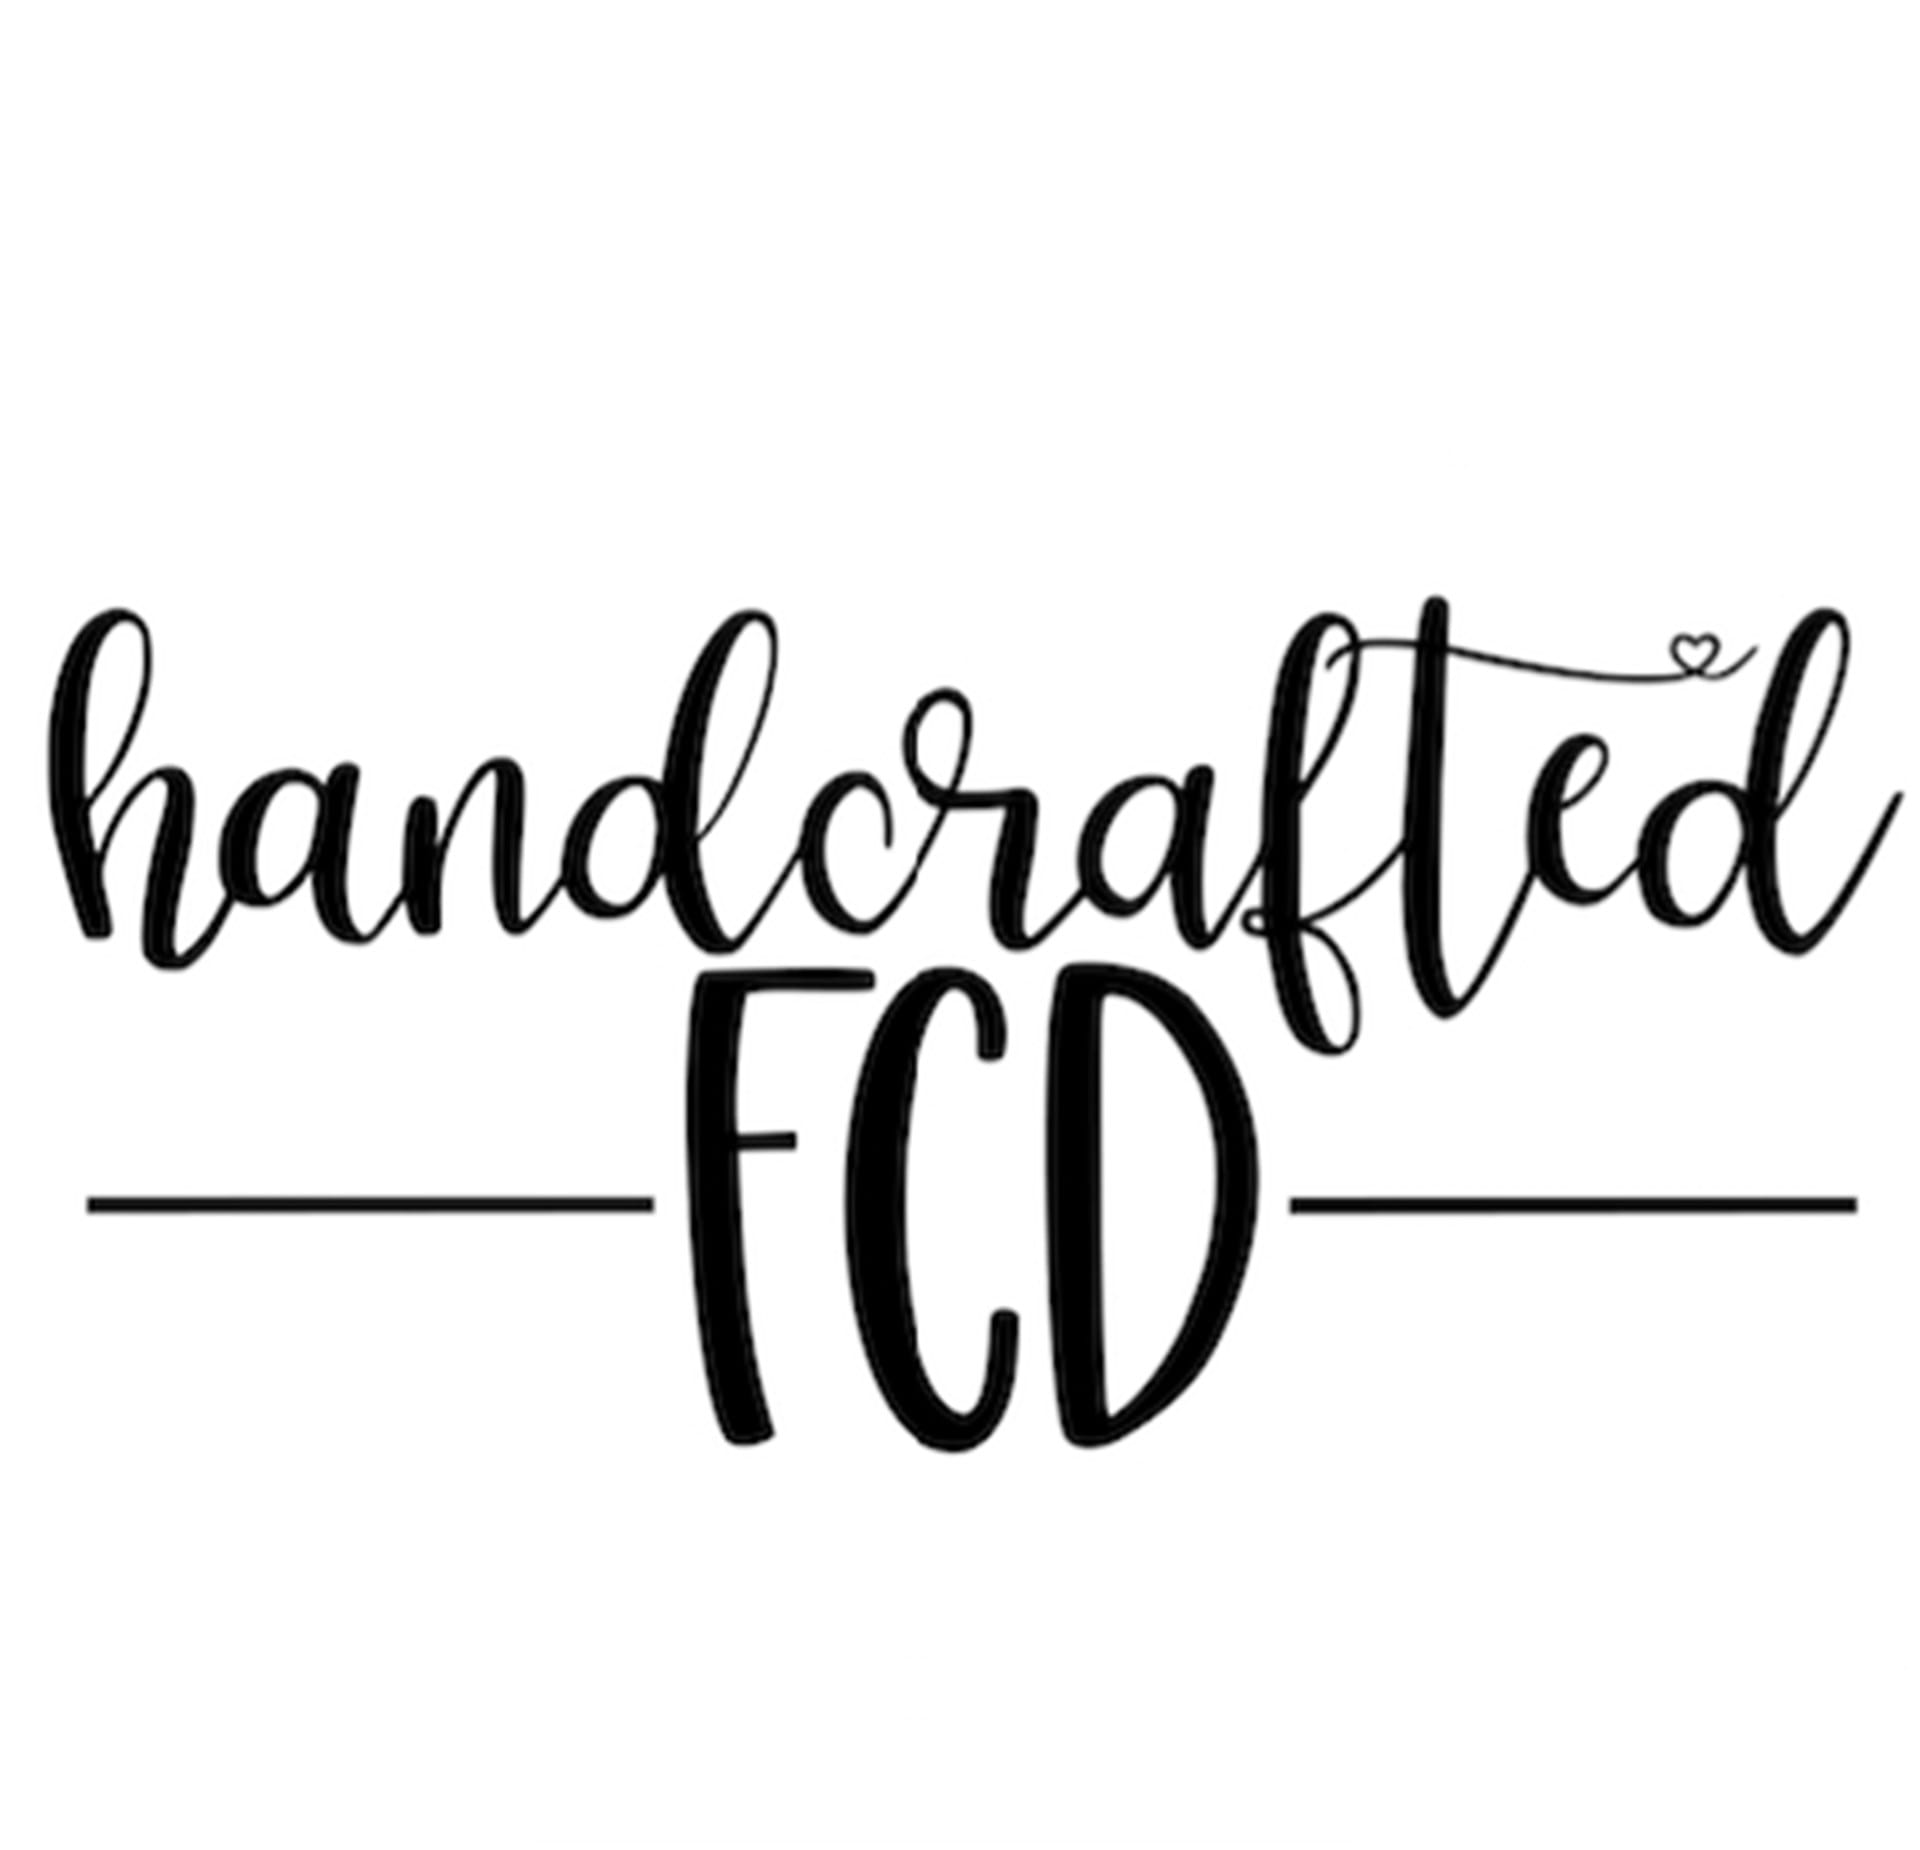 Handcrafted FCD logo